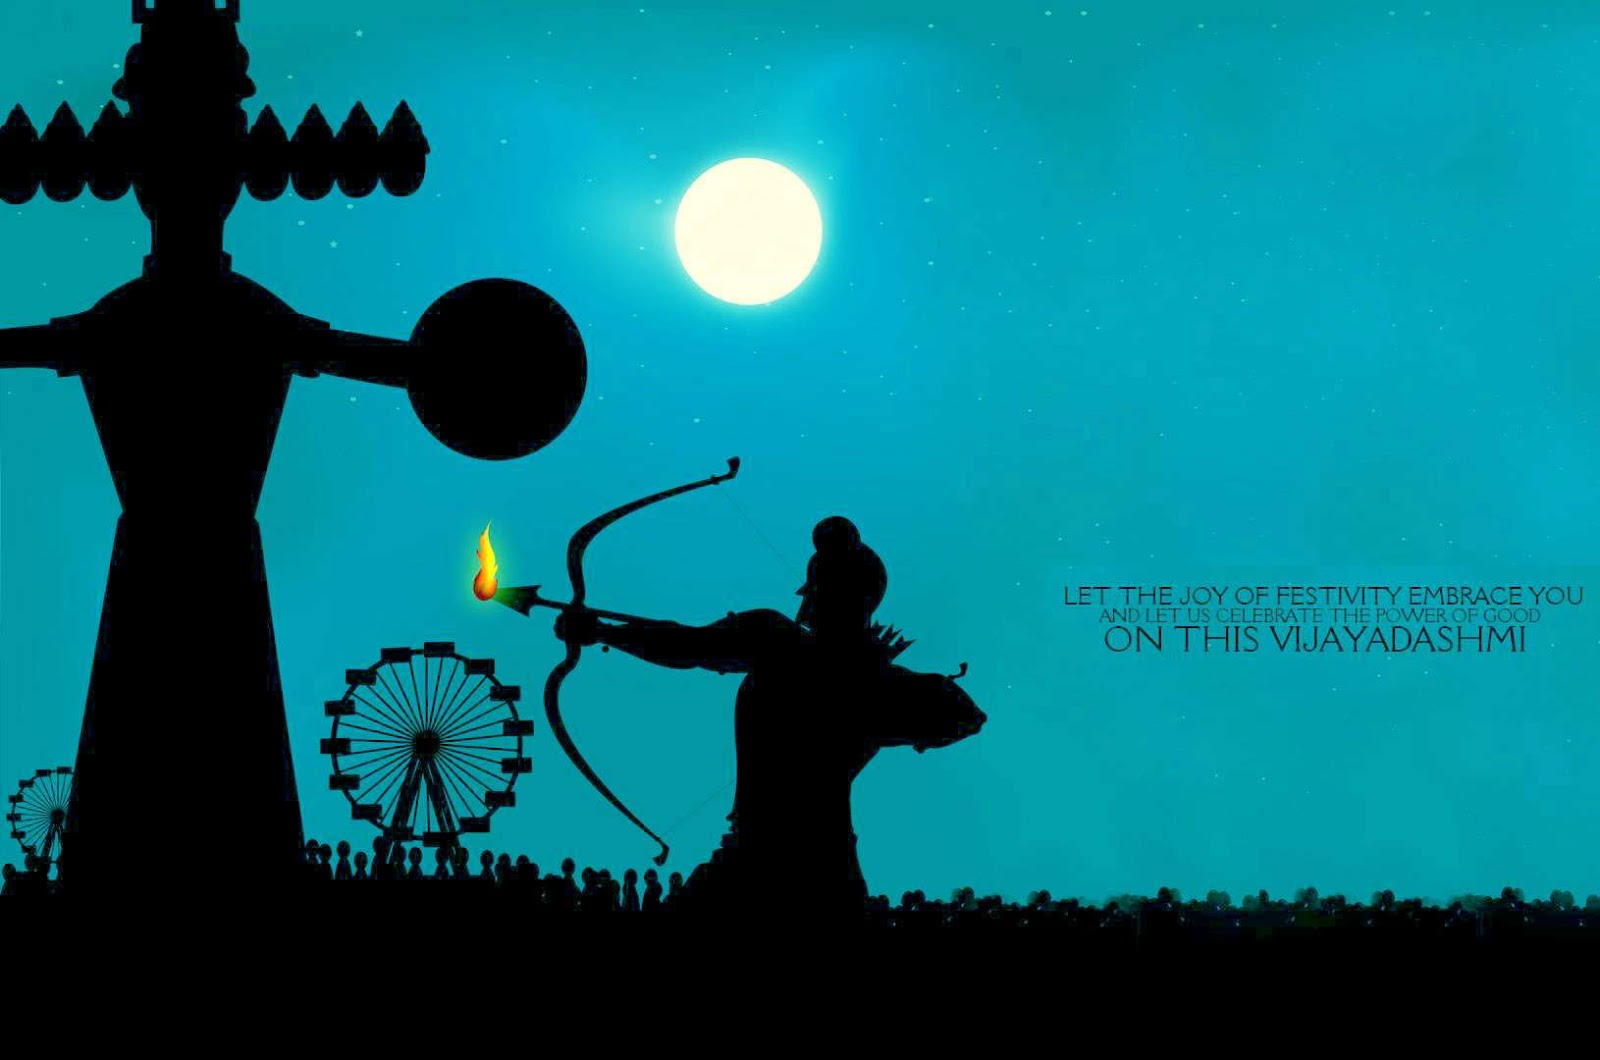 Download Dussehra images free download - Dussehra wallpapers for your  mobile cell phone